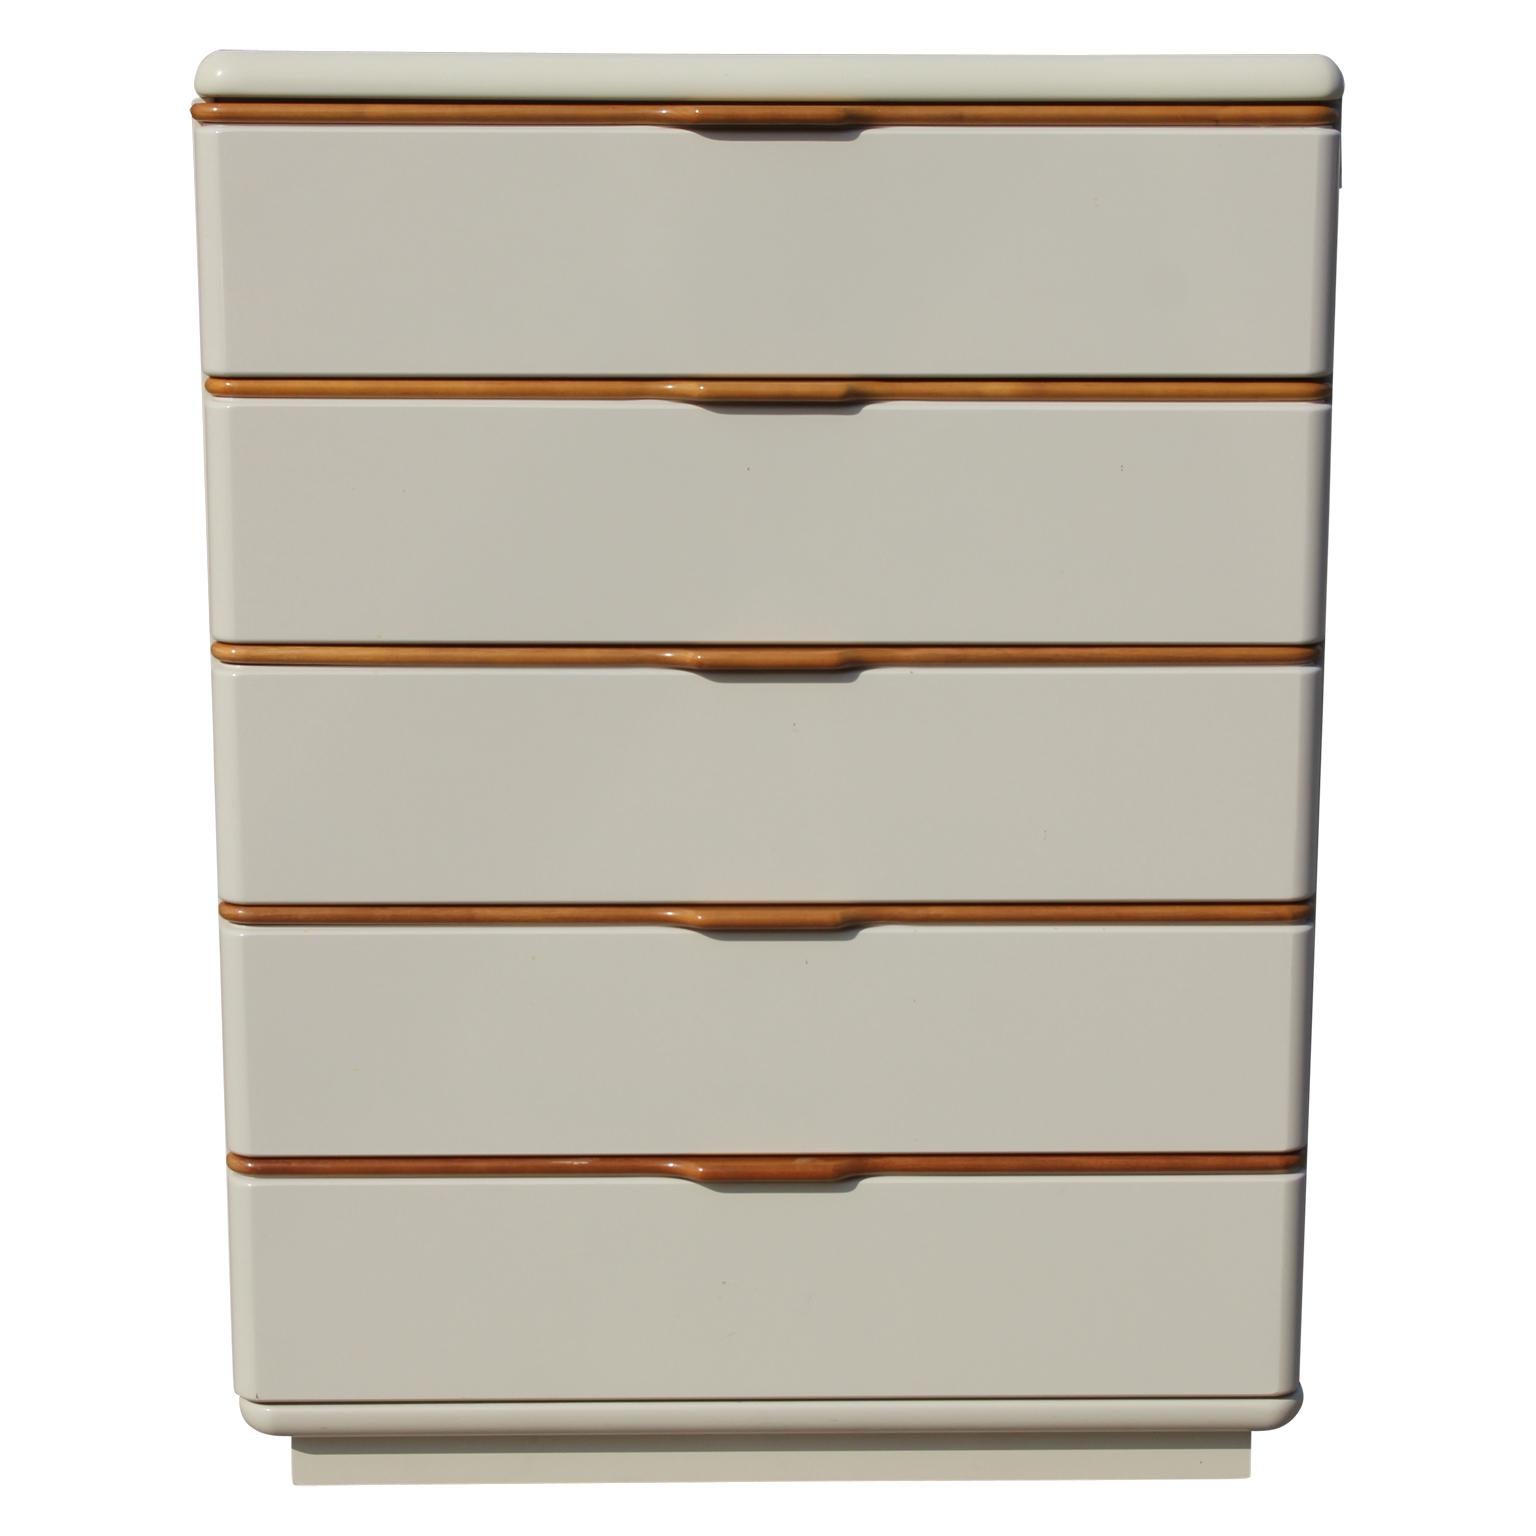 Gorgeous 5-drawer chest of drawers by Lane Altavista finished in cream colored lacquer with clear coat varnished wooden lip detail on the drawers.